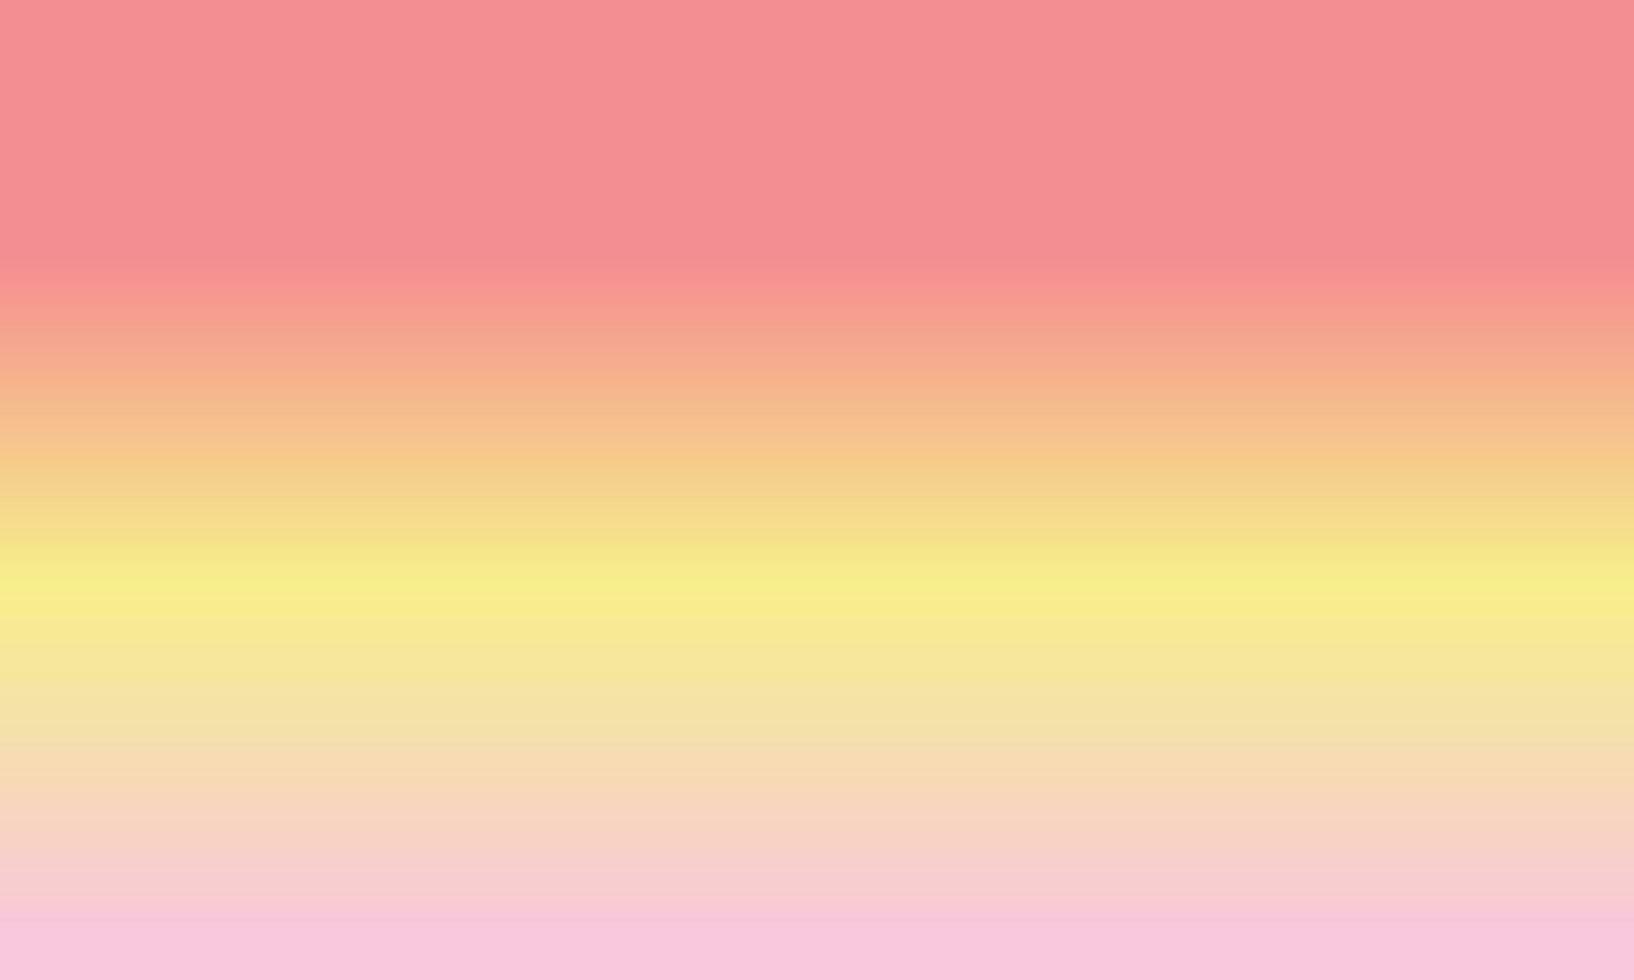 Design simple pink pastel,yellow and red gradient color illustration background photo